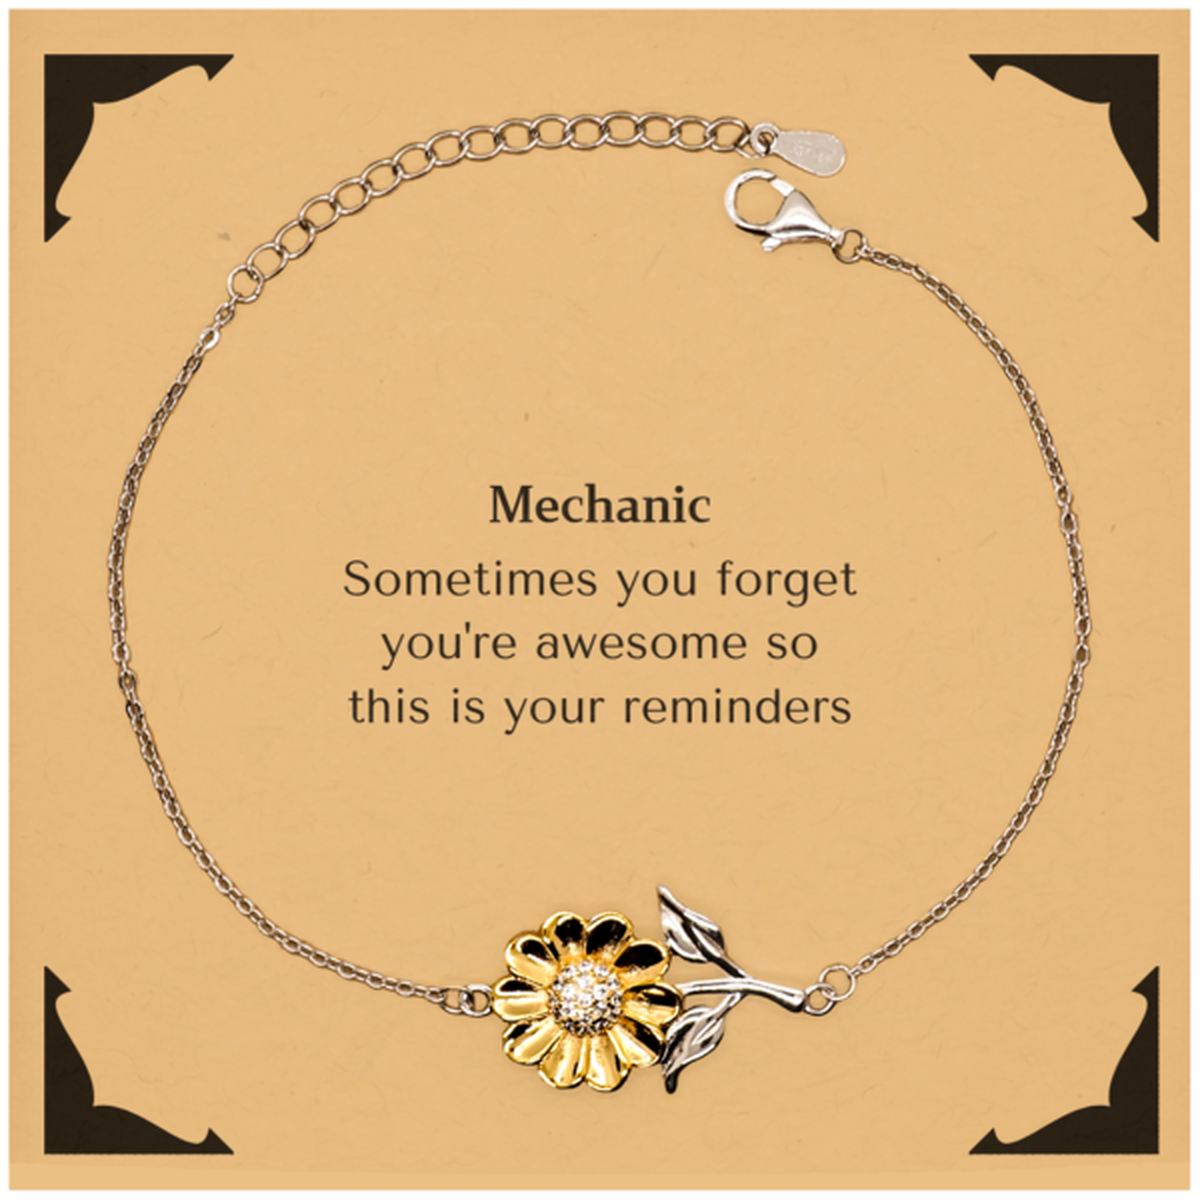 Sentimental Mechanic Sunflower Bracelet, Mechanic Sometimes you forget you're awesome so this is your reminders, Graduation Christmas Birthday Gifts for Mechanic, Men, Women, Coworkers